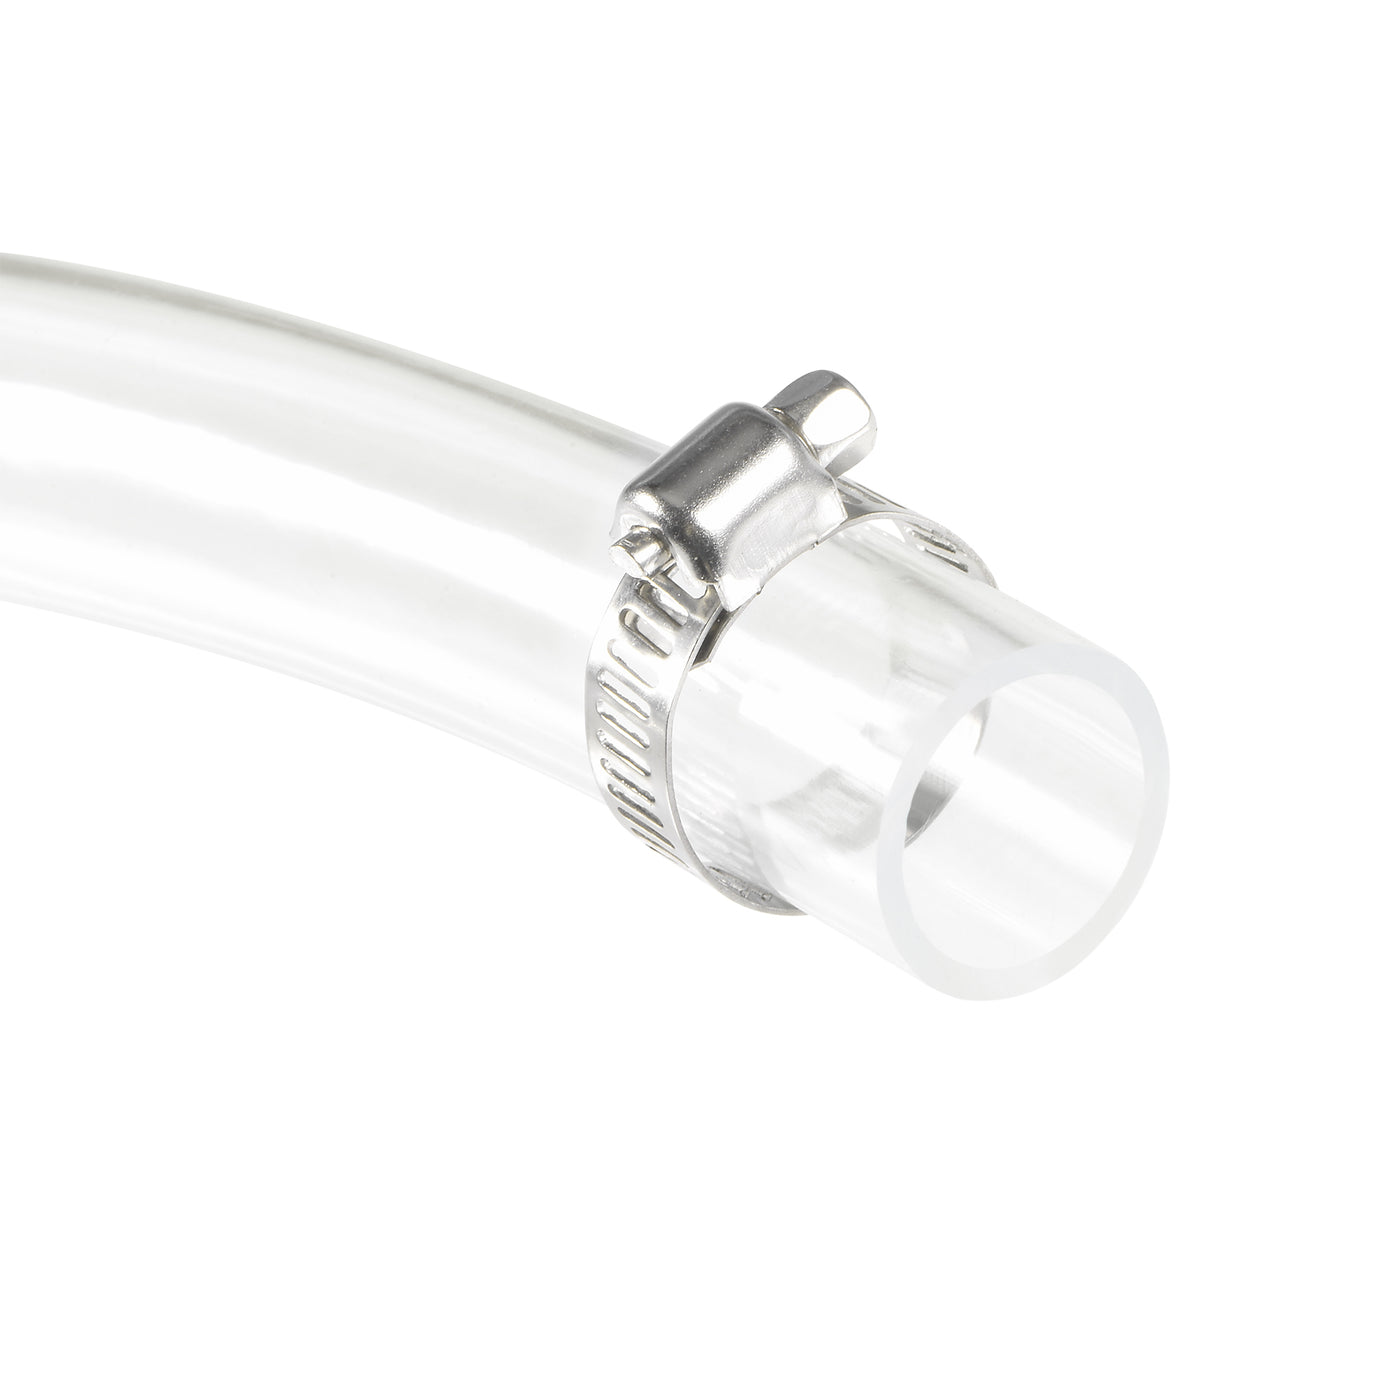 uxcell Uxcell PVC Clear Vinyl Tubing, 16mm(5/8") ID 20mm(25/32") OD 3.3ft Plastic Pipe Air Water Hose with Clamps